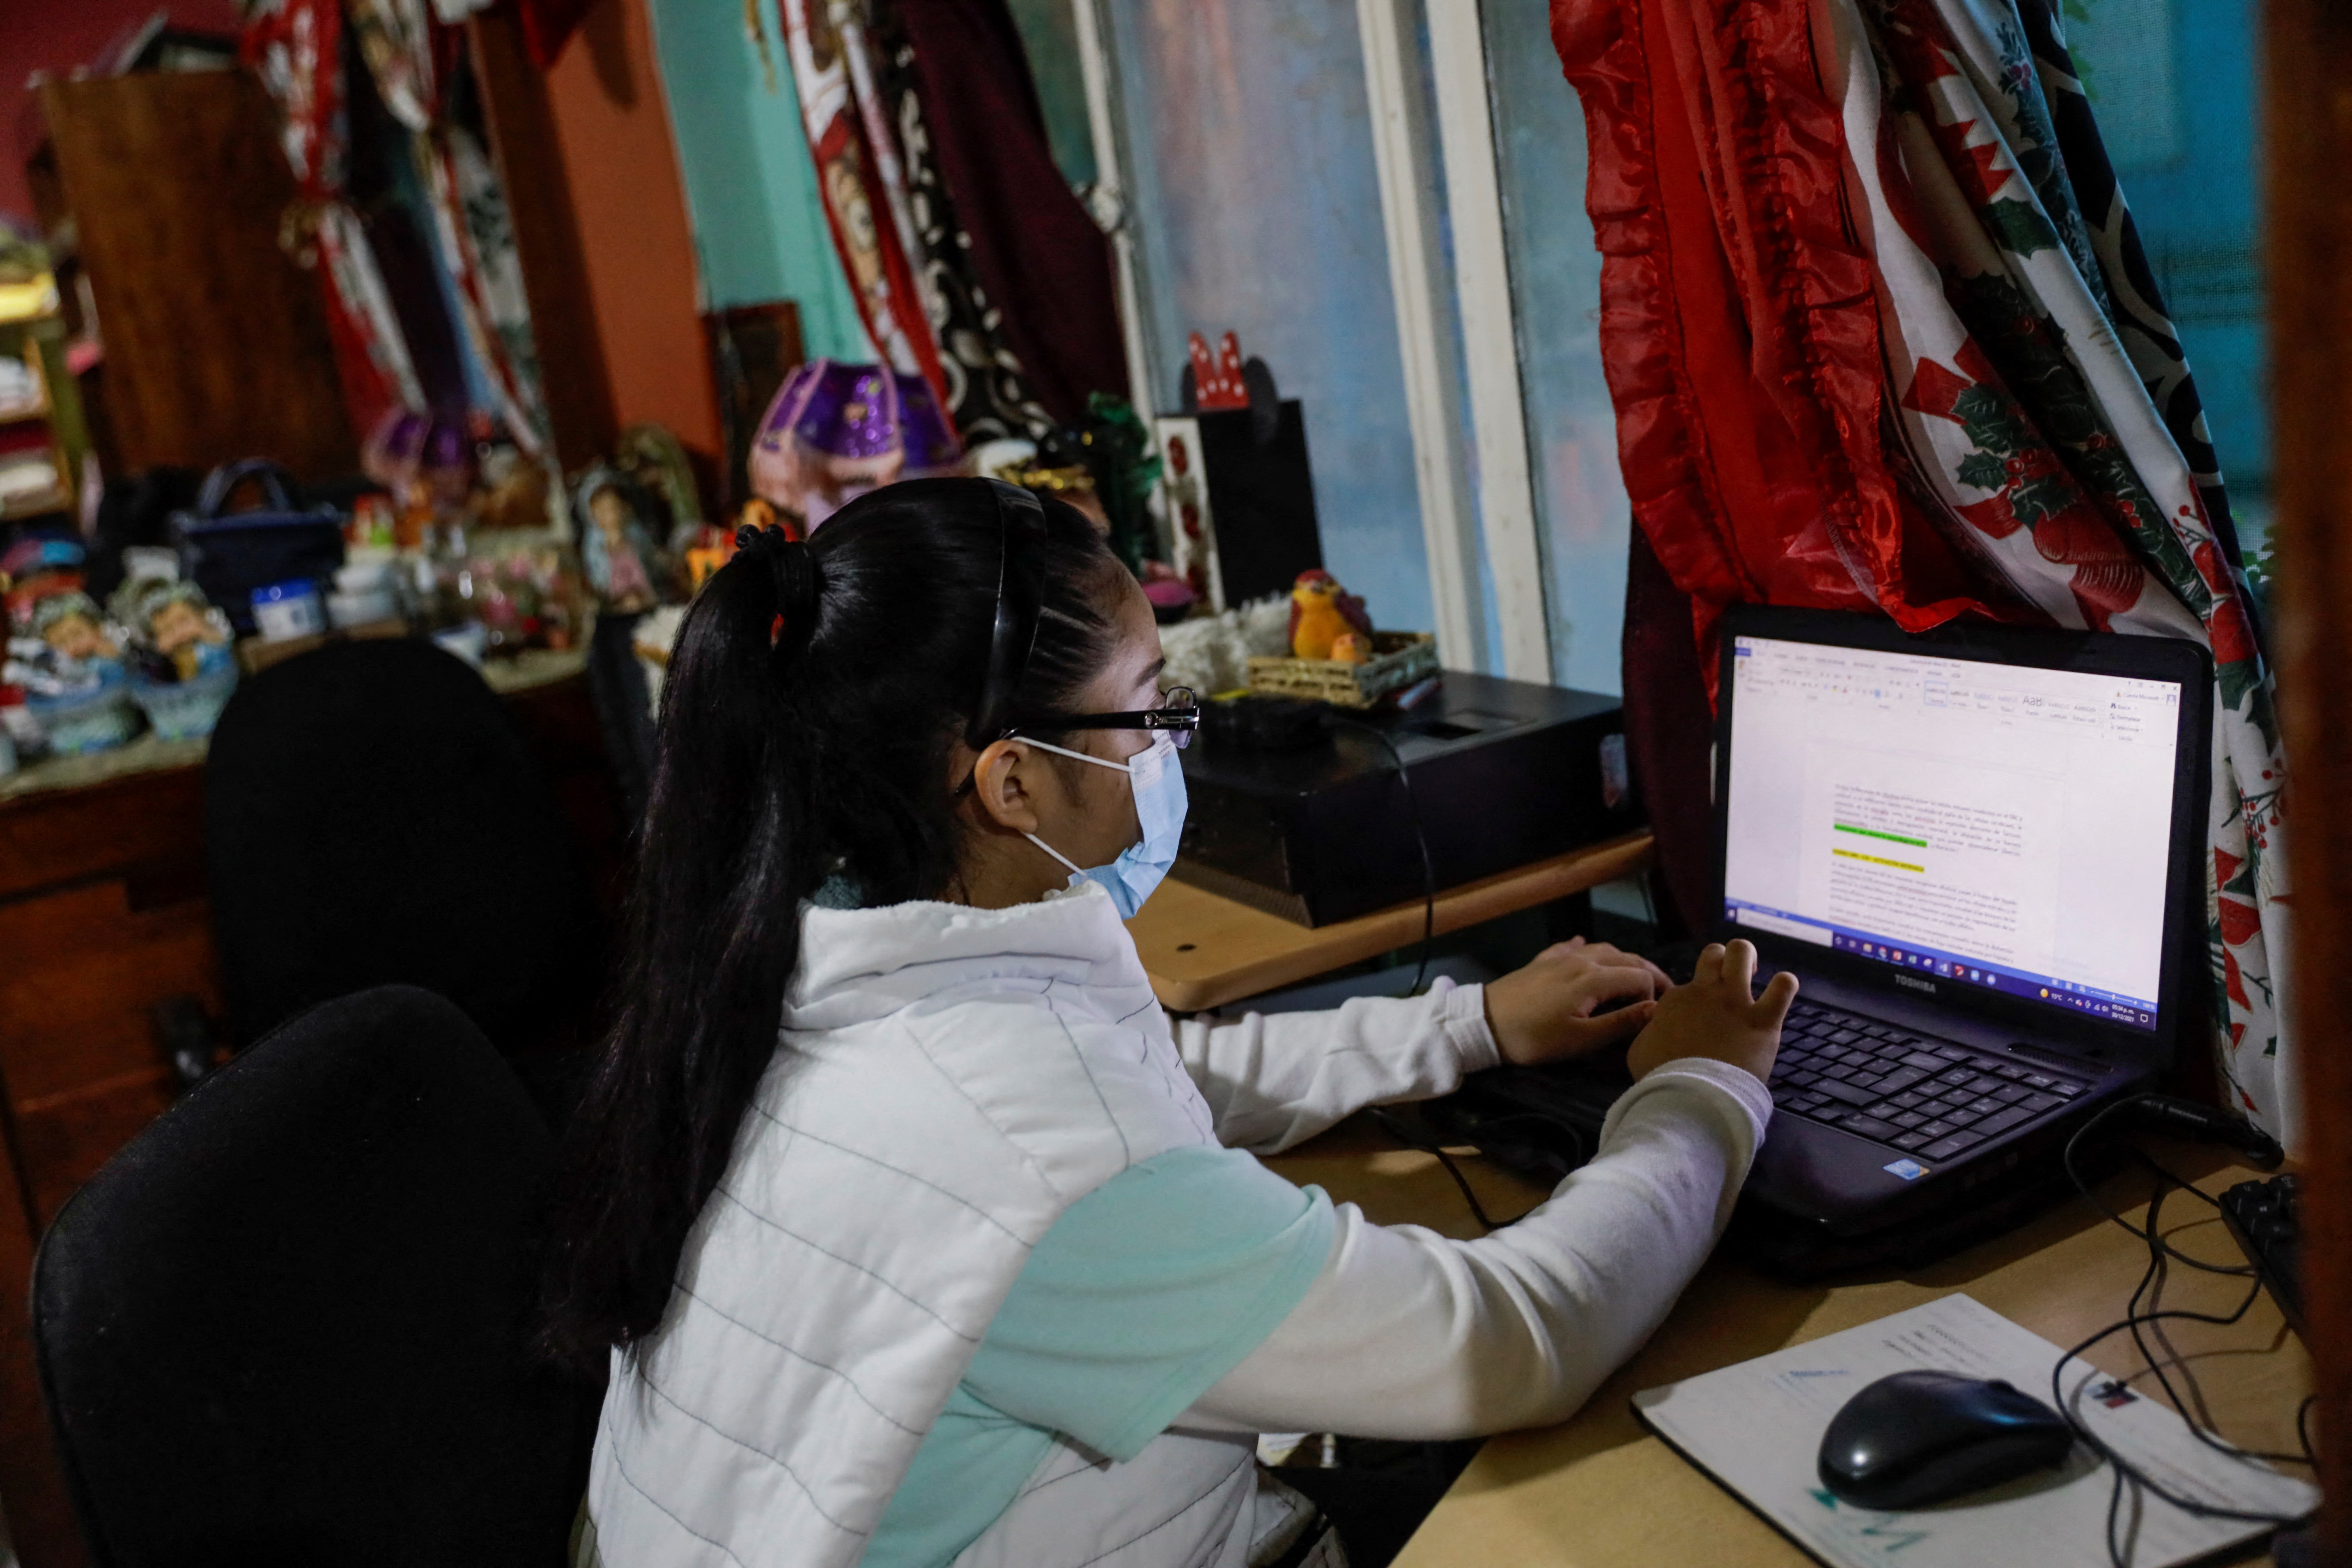 Guadalupe Estrella Salazar Calderon, 17, who is developing a sign-language translation app to connect Mexican Sign Language (MSL) speakers and interpreters with hearing users, writes a document in her laptop, at her house in the municipality of Nezahualcoyotl, Mexico December 30, 2021. REUTERS/Luis Cortes